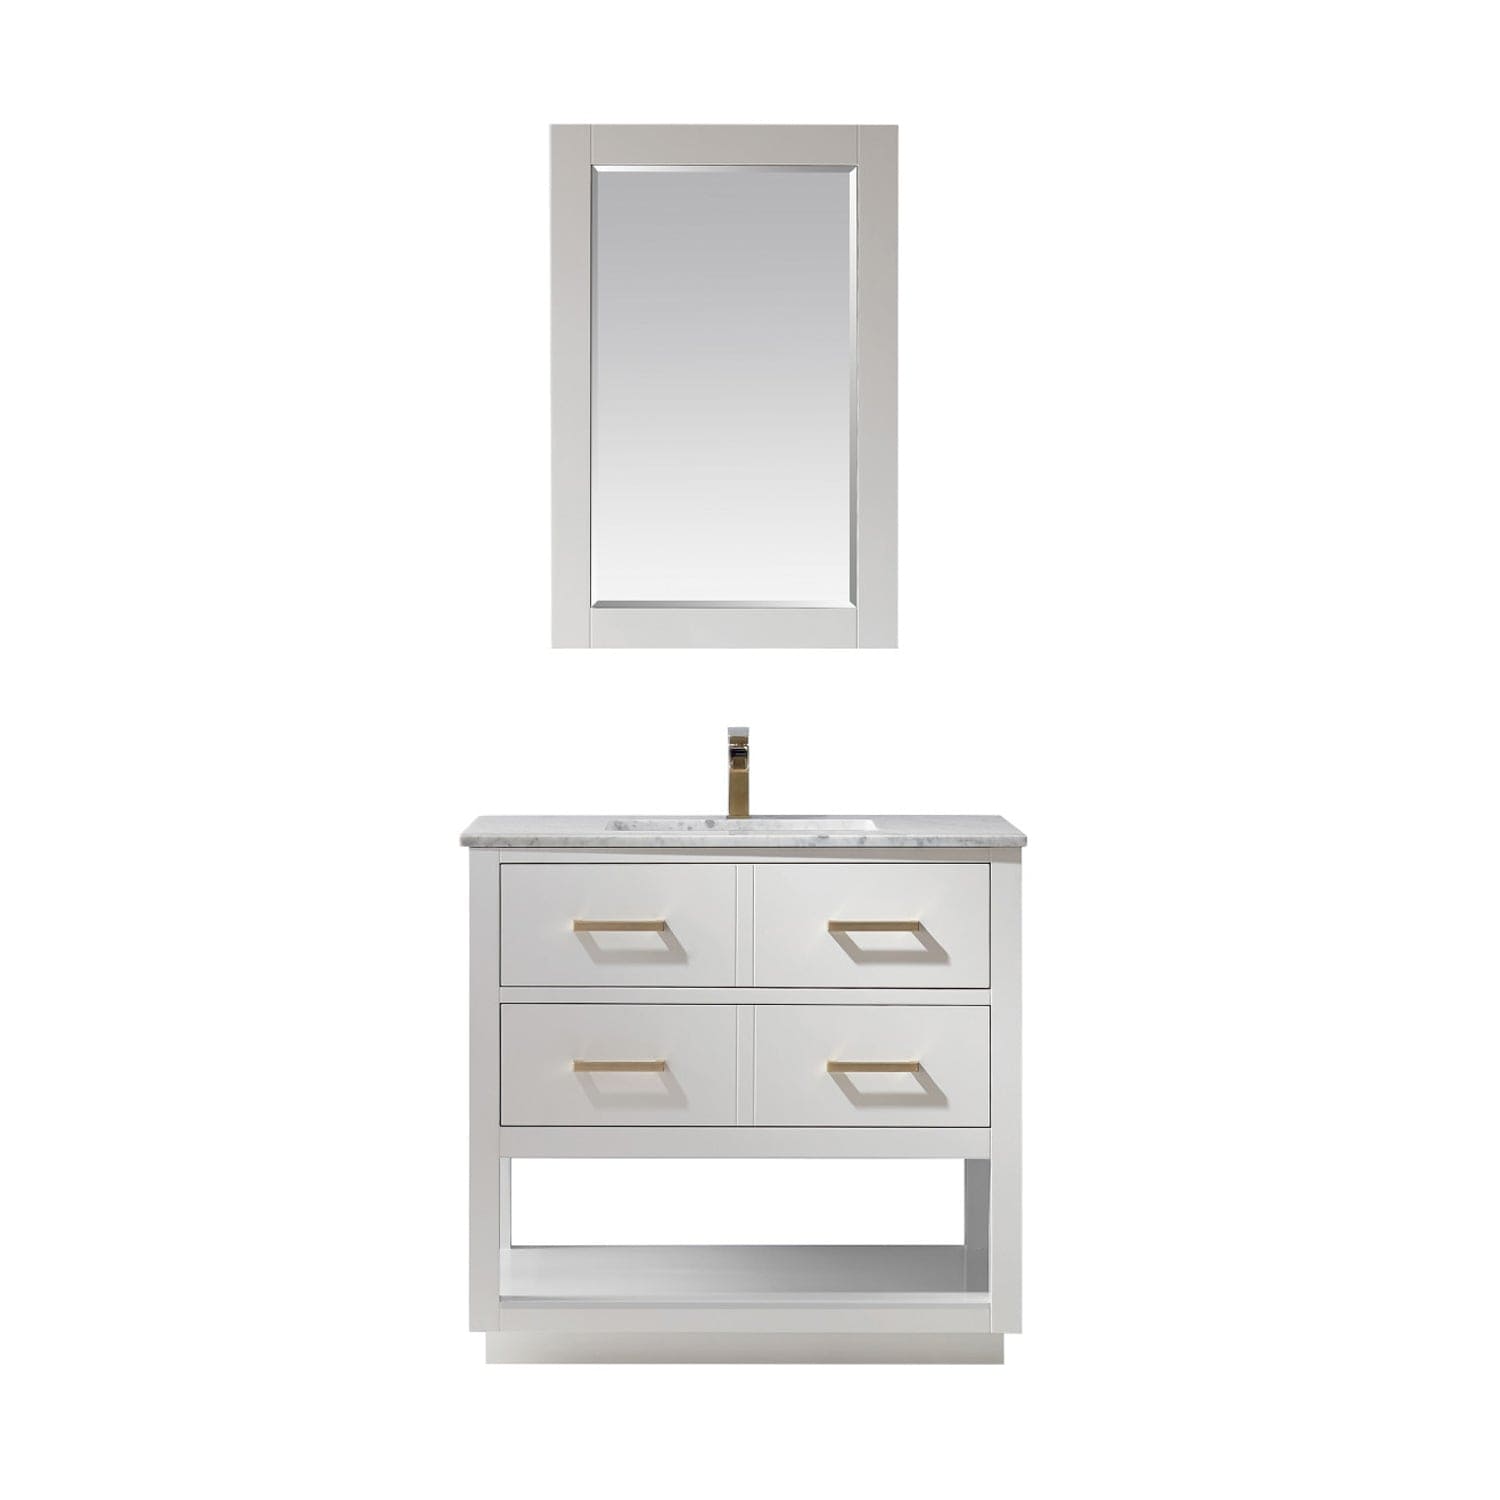 Altair Remi 36" Single Bathroom Vanity Set in White and Carrara White Marble Countertop with Mirror 532036-WH-CA - Molaix631112971430Vanity532036-WH-CA